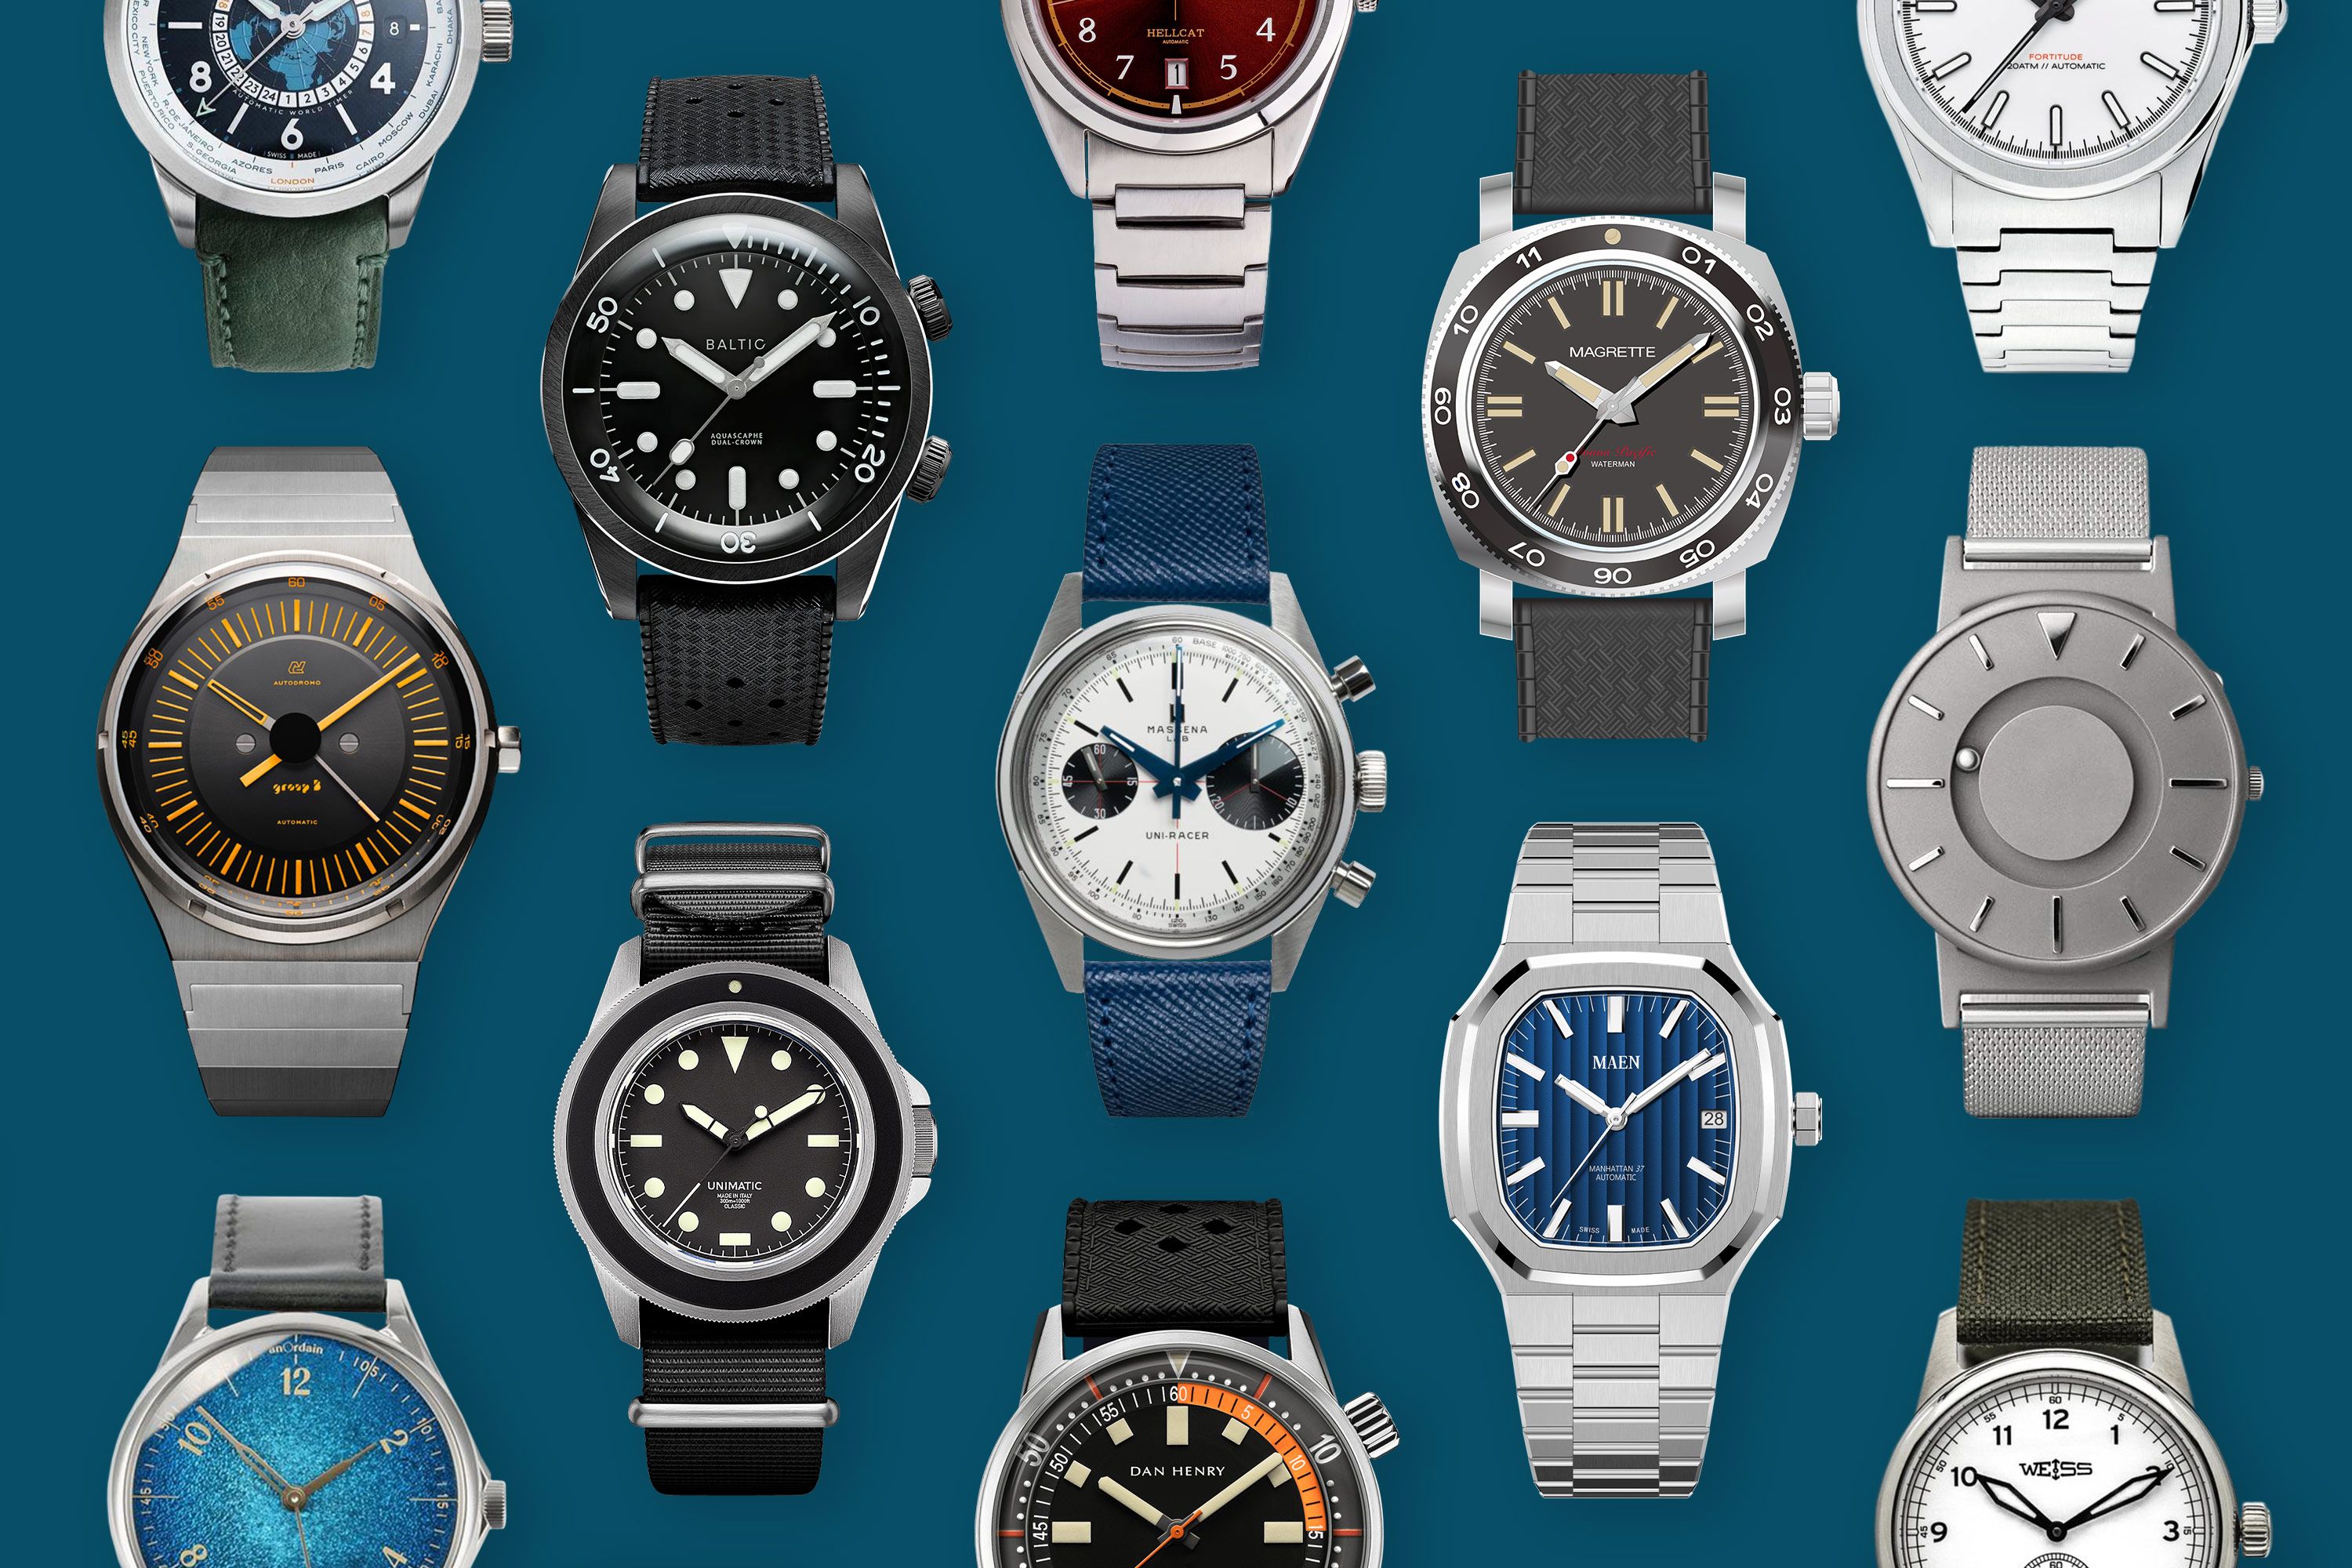 Independent watch brands work with retail partners to grow sales